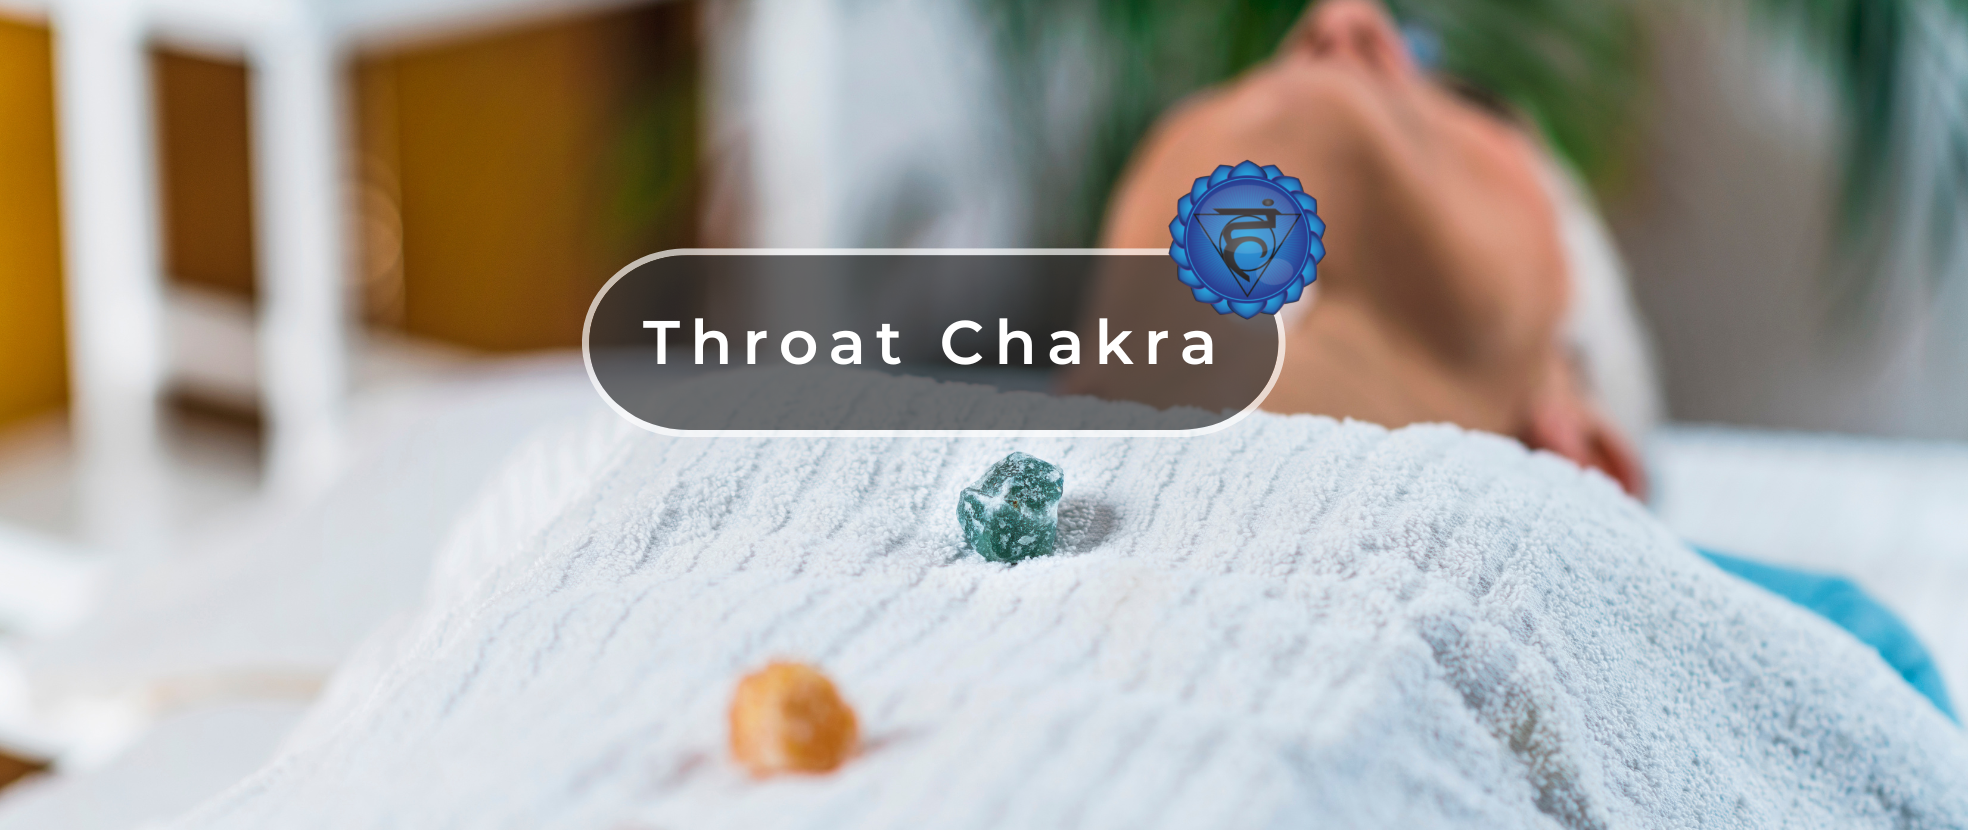 How to Heal Your Throat Chakra and Be a Better Communicator